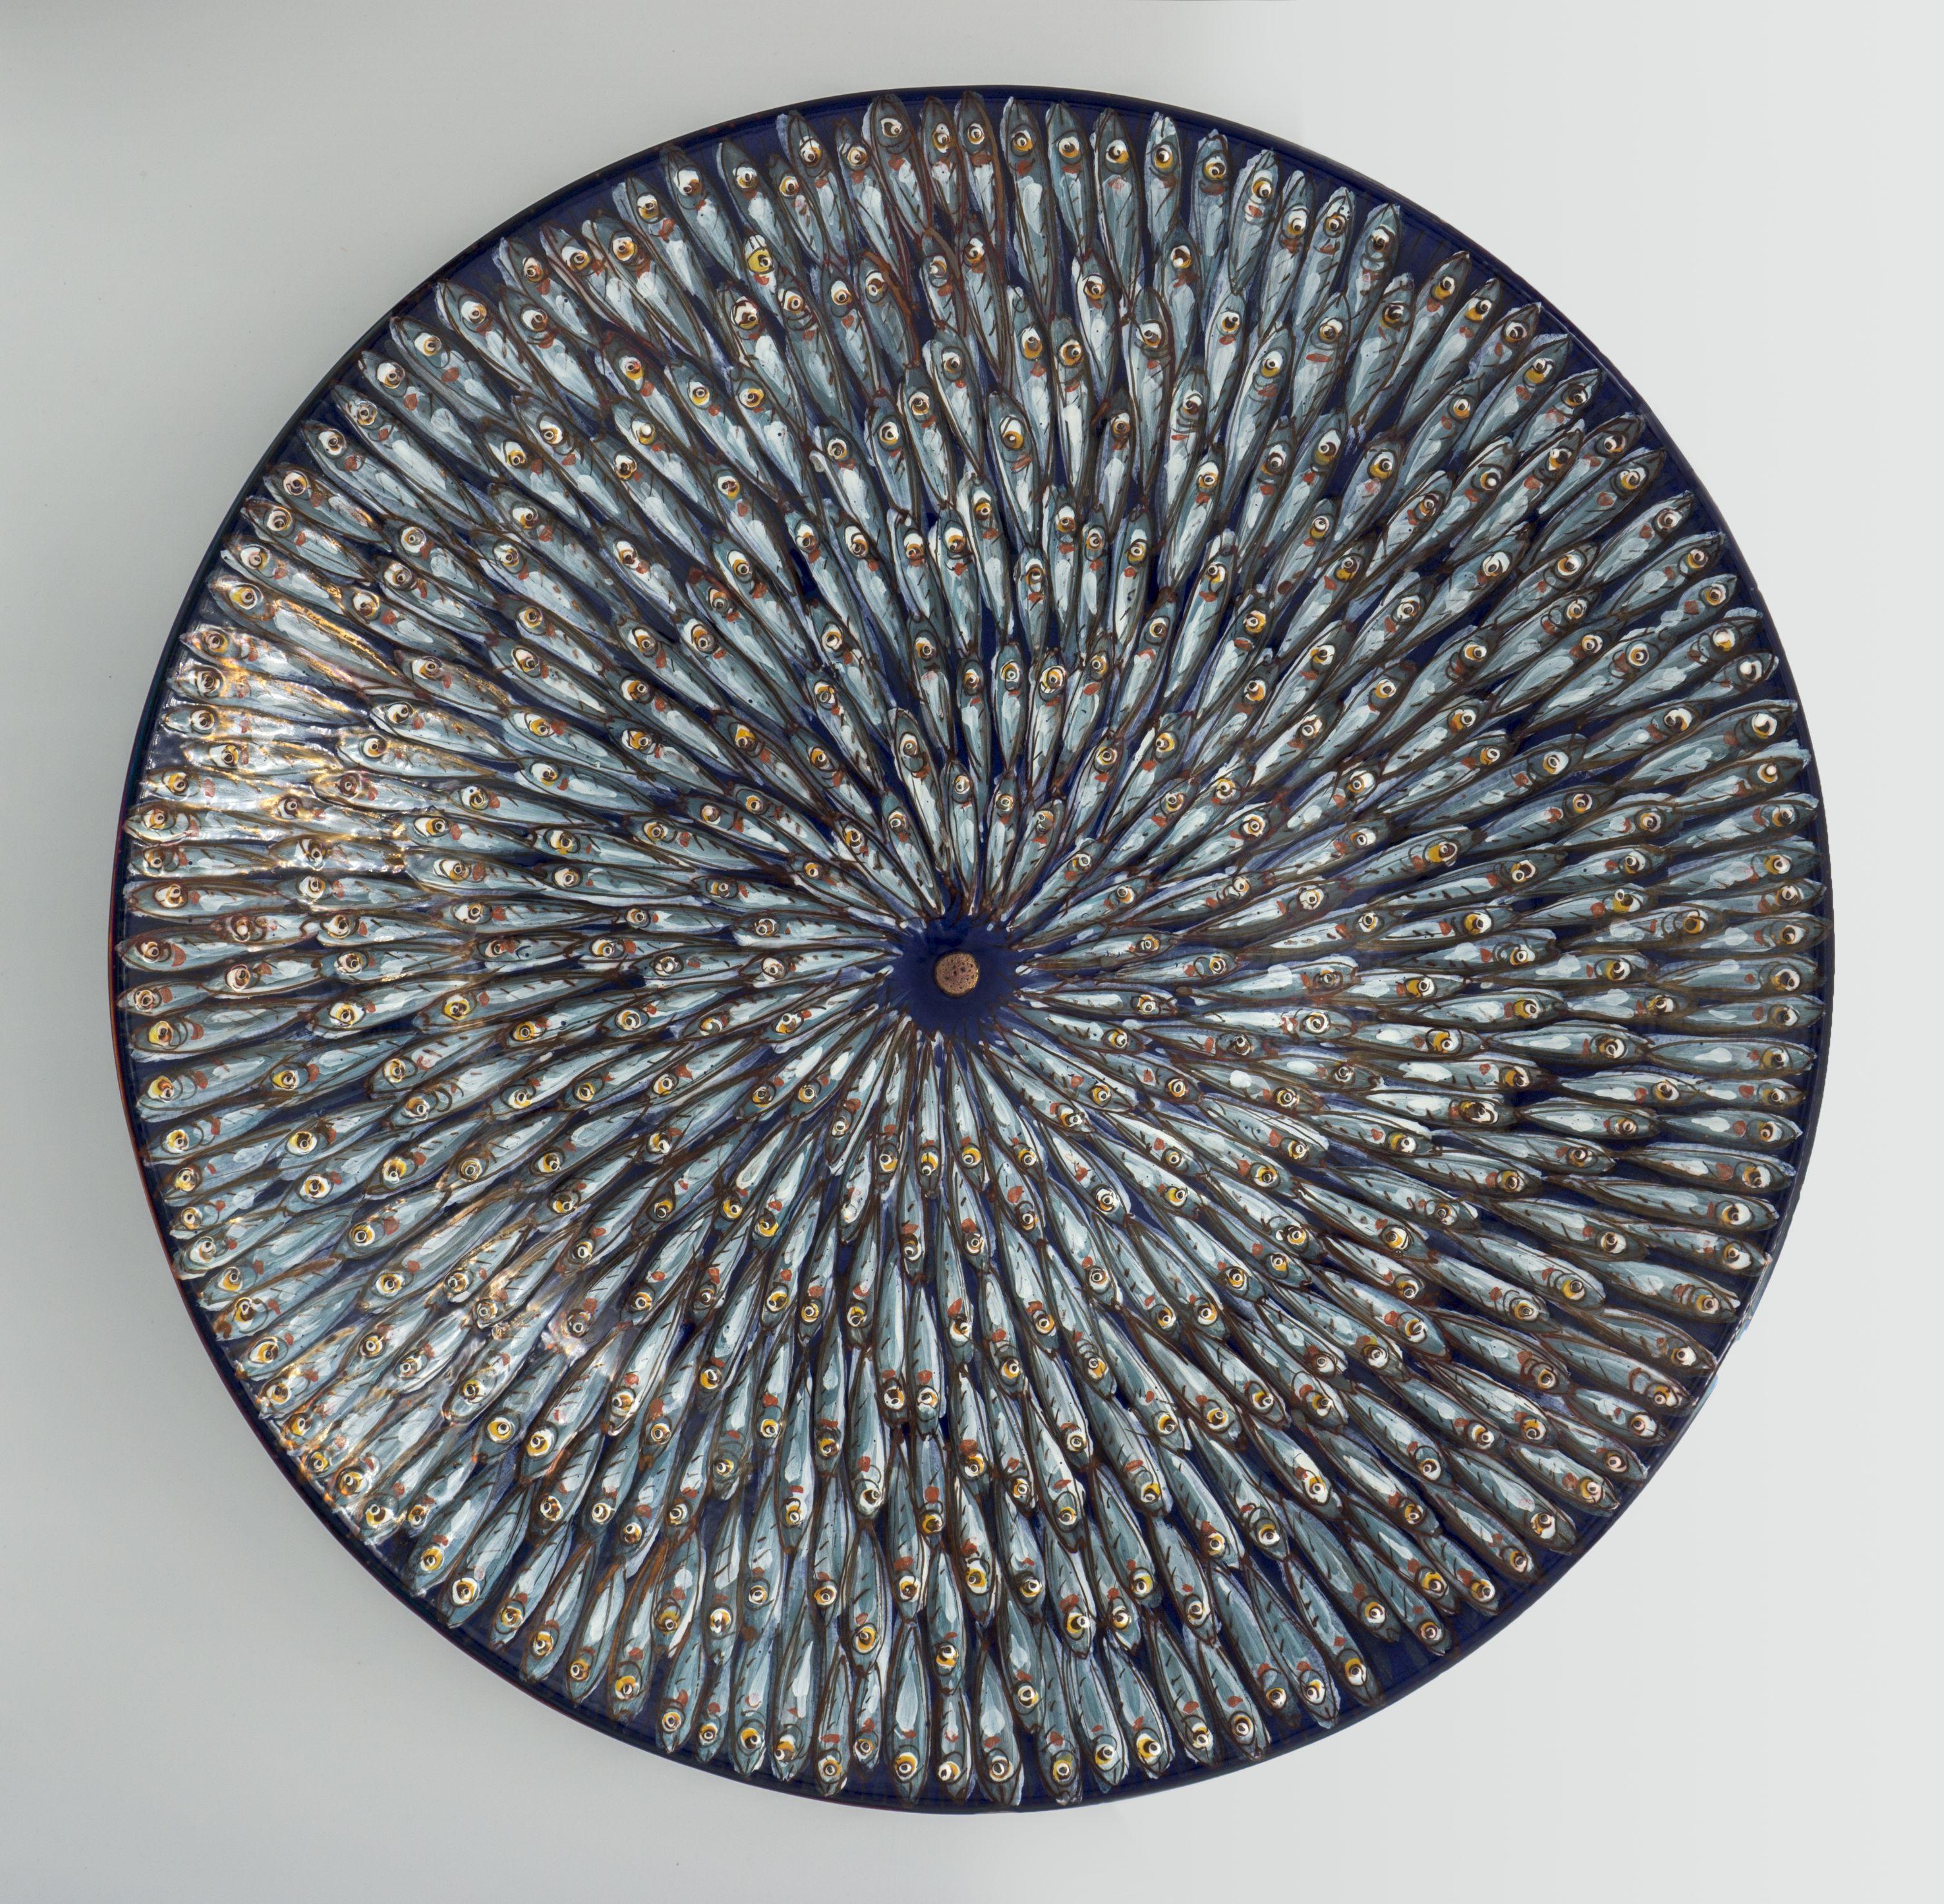 Bottega Vignoli, Mediterranea large plate, 2020, full-fire reduction faience earthenware
55cm diameter, hand painted unique piece.

Perfect décor for the wall or simply placed at the centre of a table, this stunning design will have a treasured